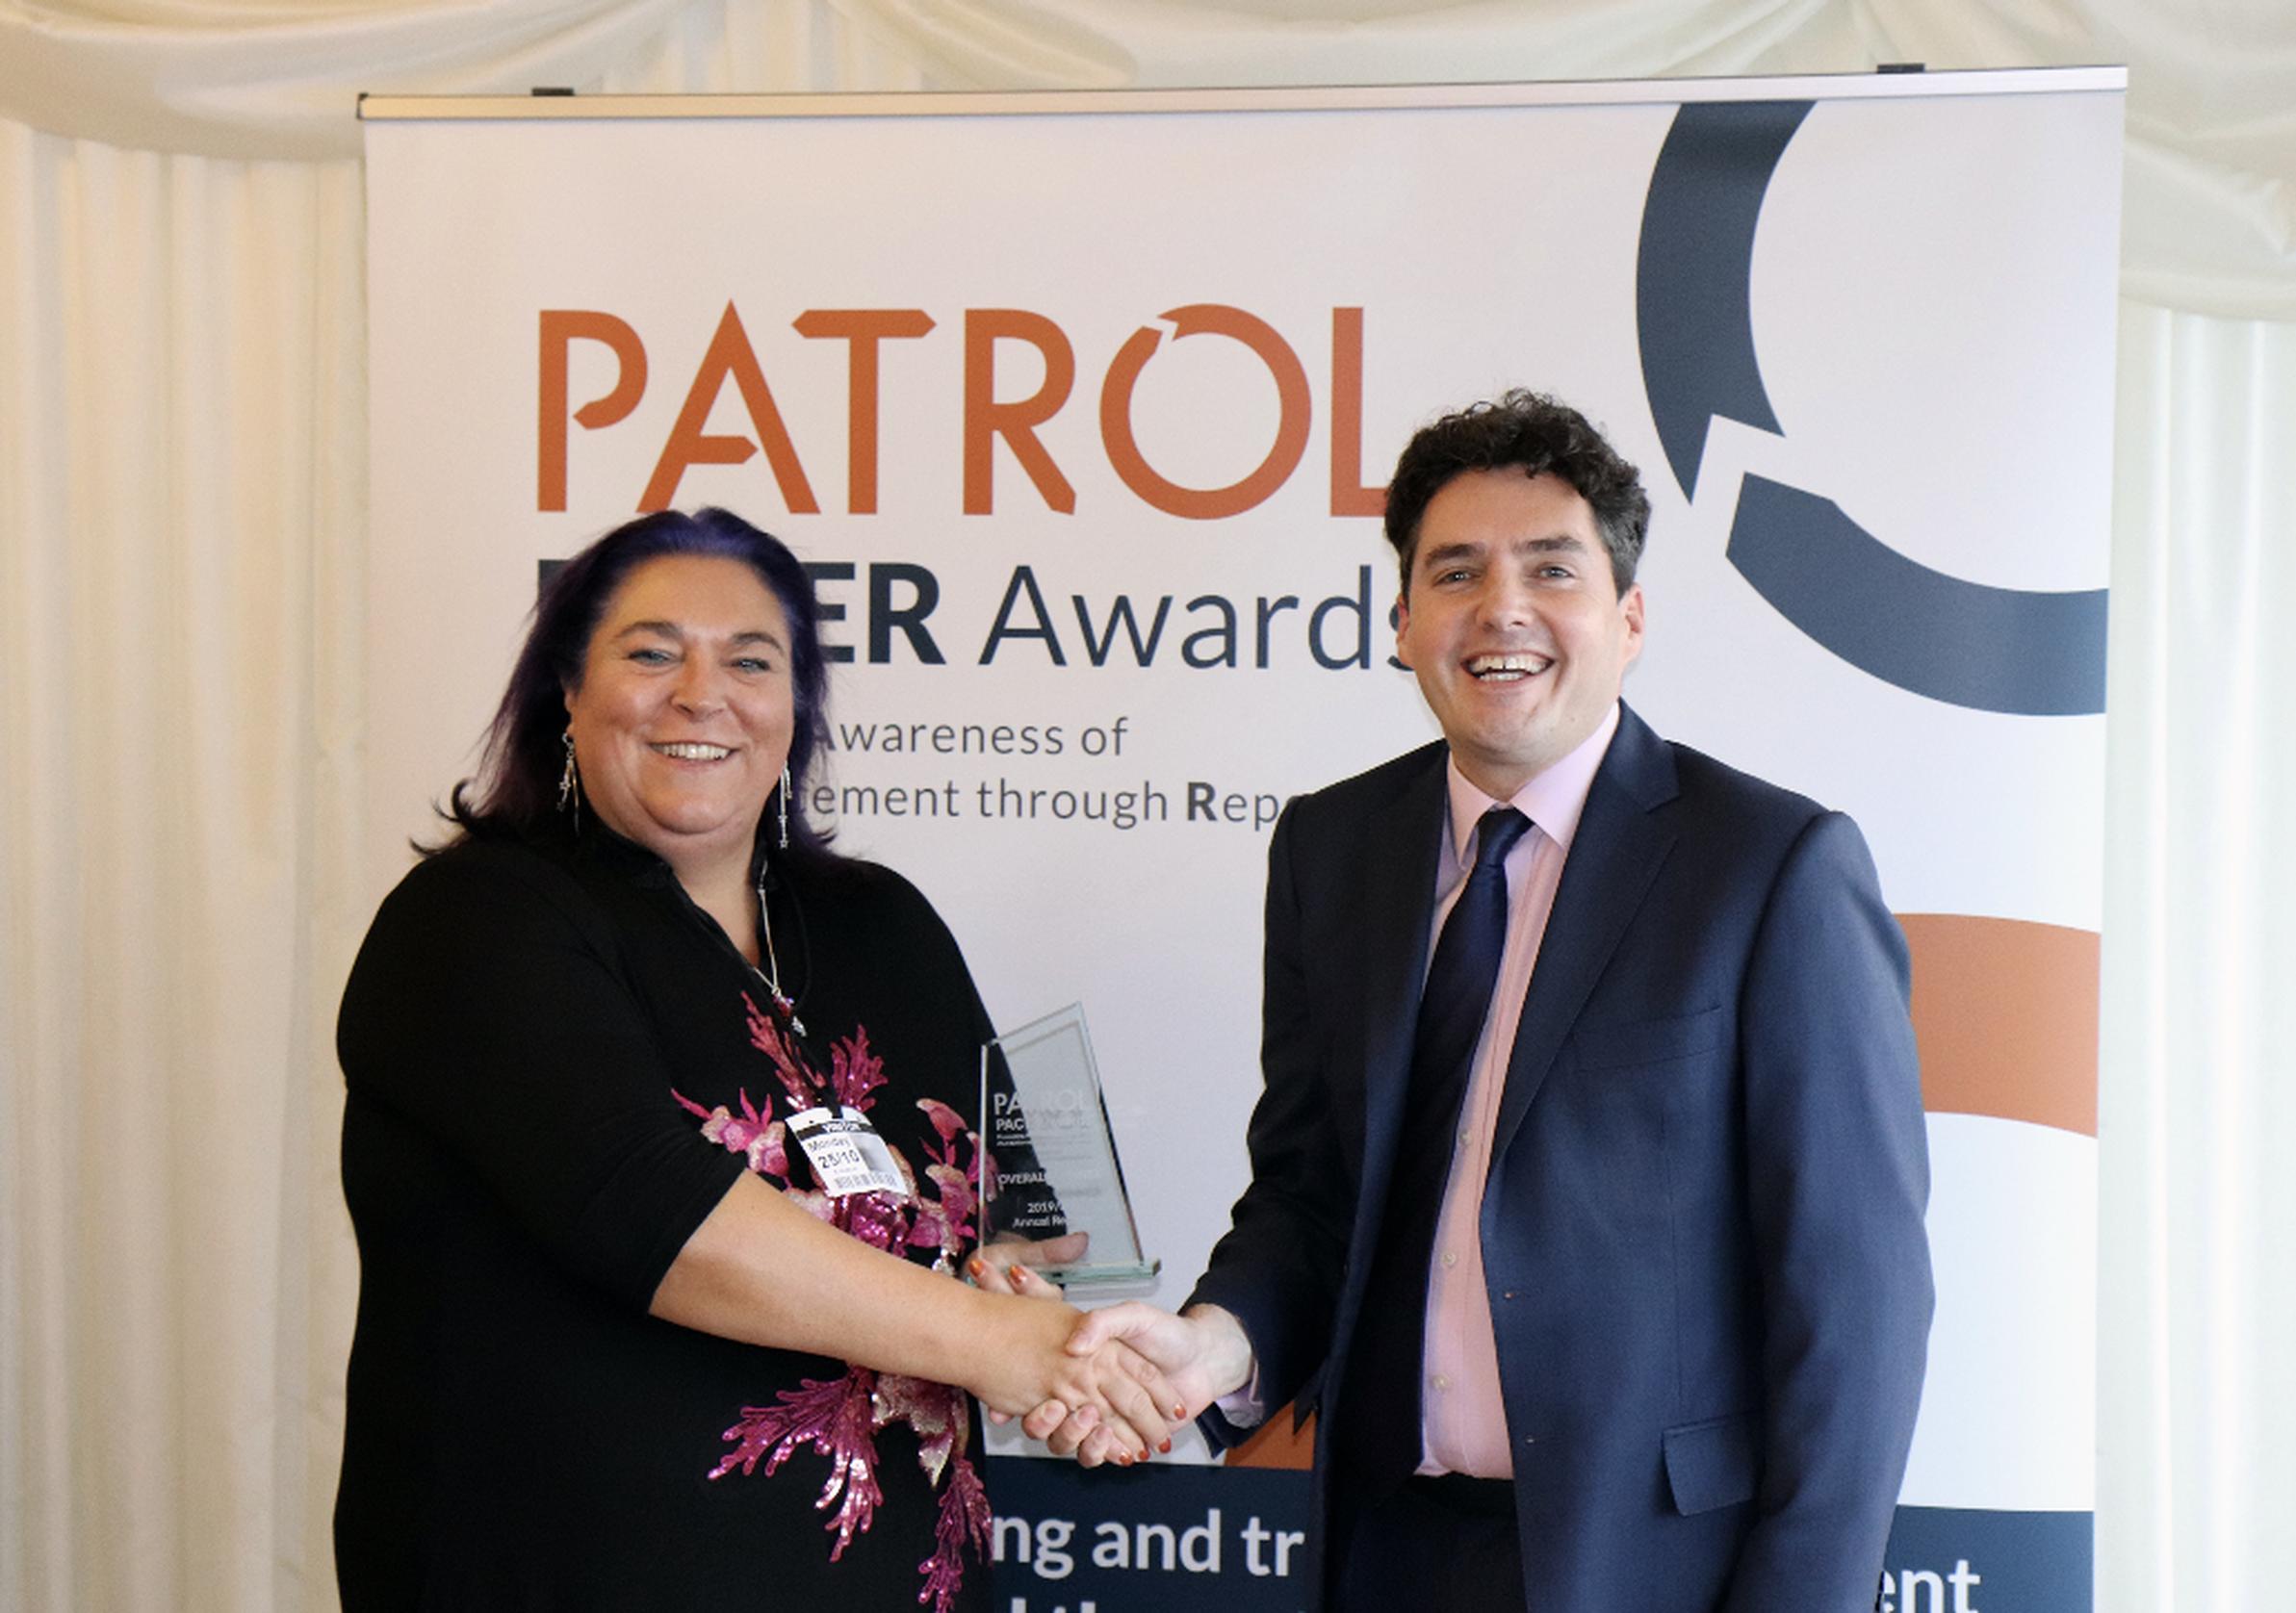 Lorraine Martin, parking services manager at Cheshire East Council, with Huw Merriman MP, chair of the House of Commons Transport Committee